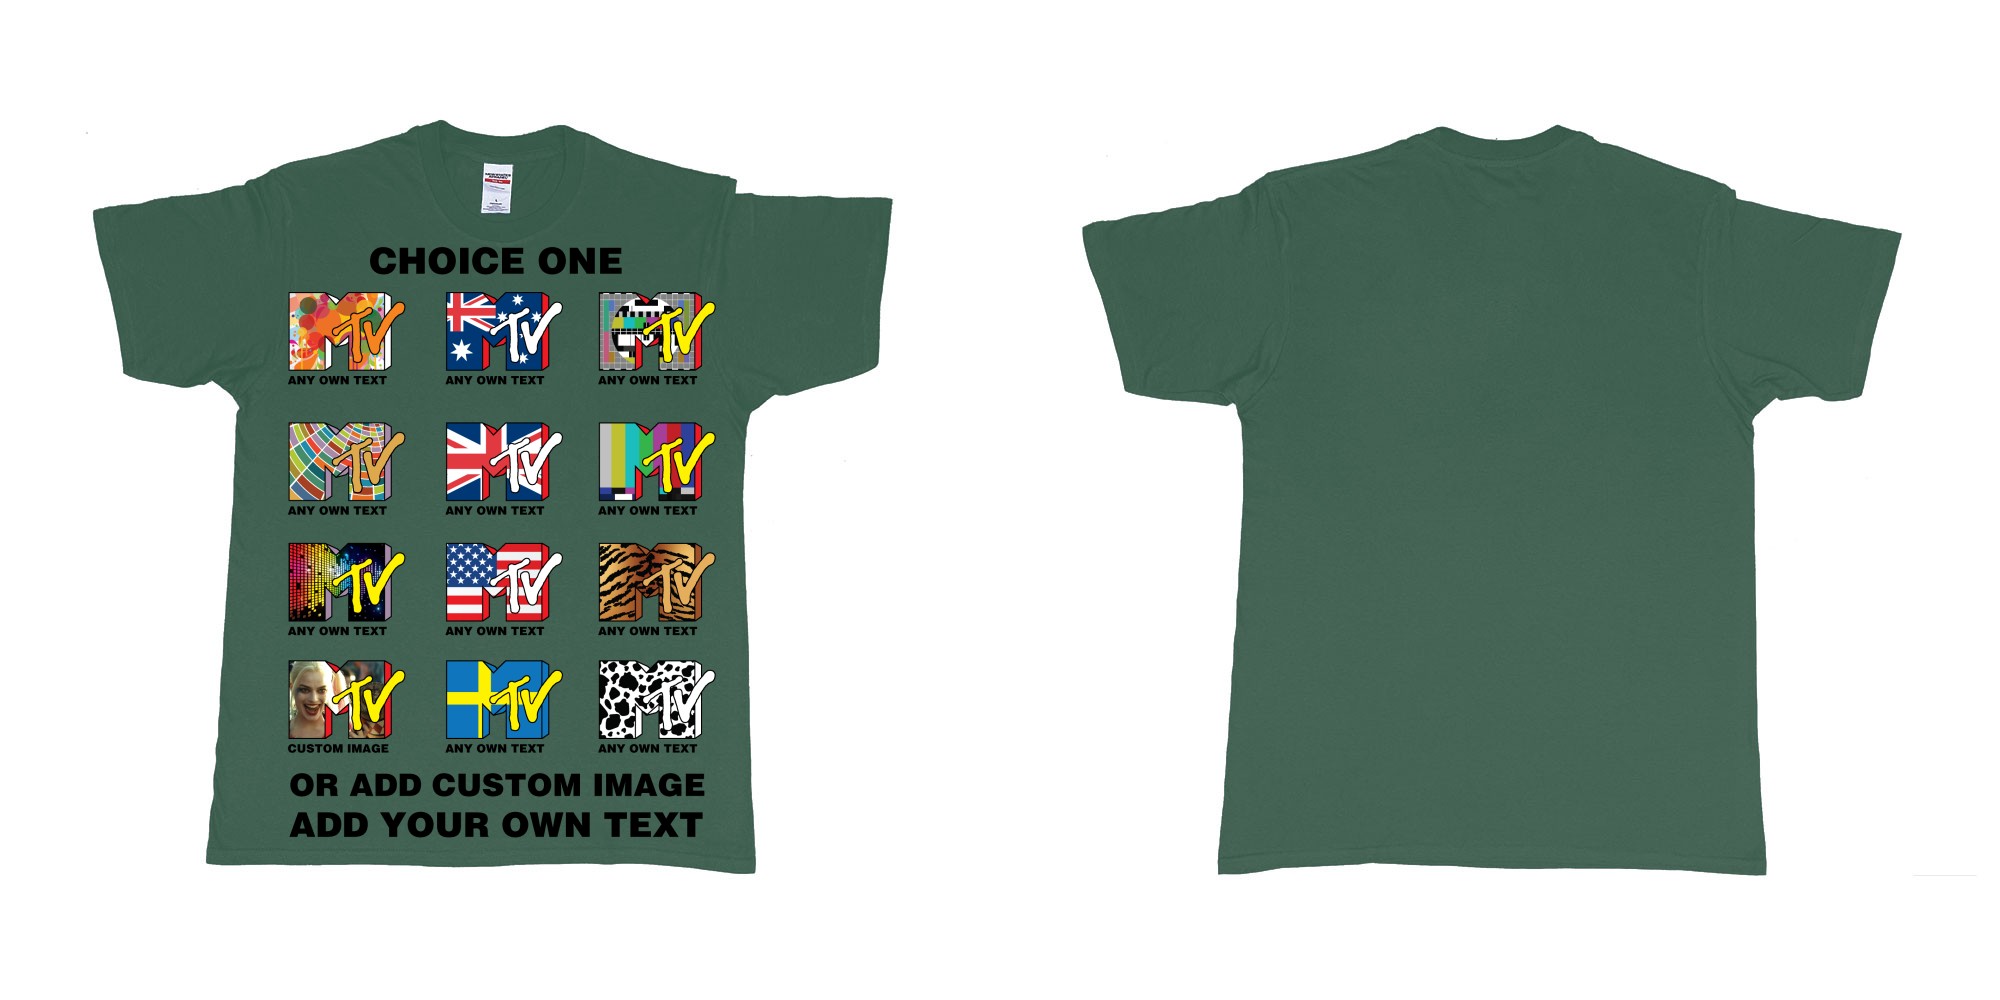 Custom tshirt design mtv logo choice any background text print in fabric color forest-green choice your own text made in Bali by The Pirate Way